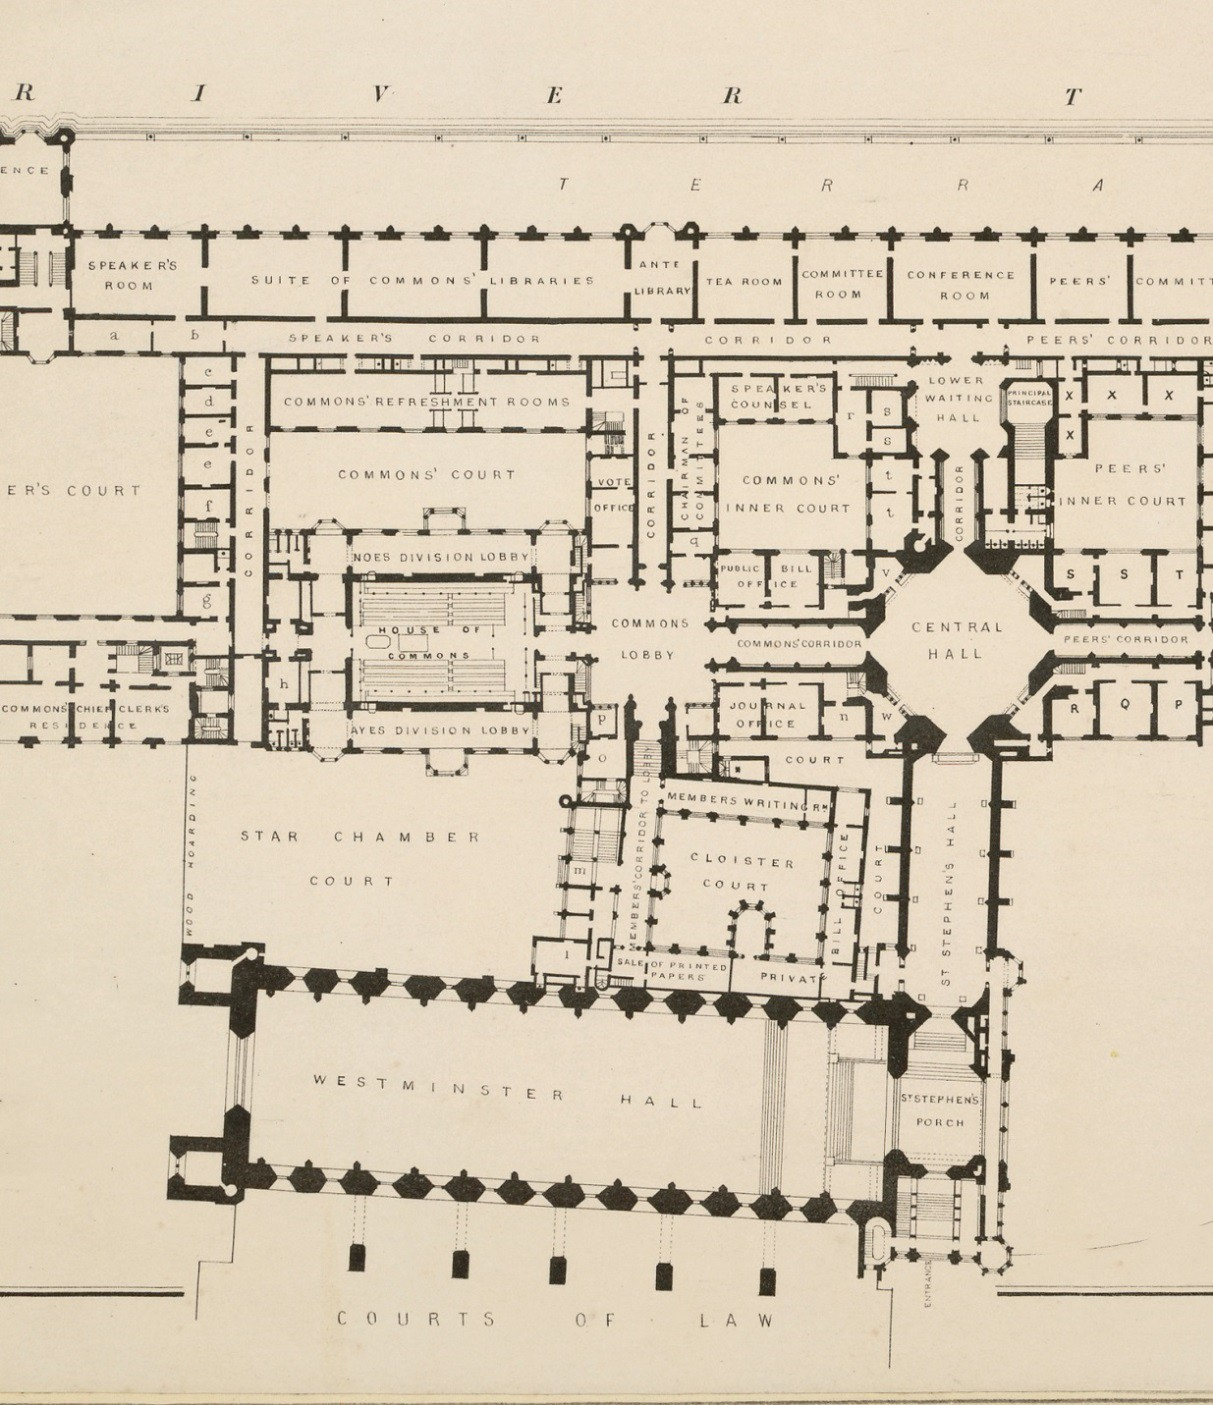 British House of Commons, from the Plan of the Houses of Parliament and Offices, on the principal floor of the Palace of Westminster (1852)